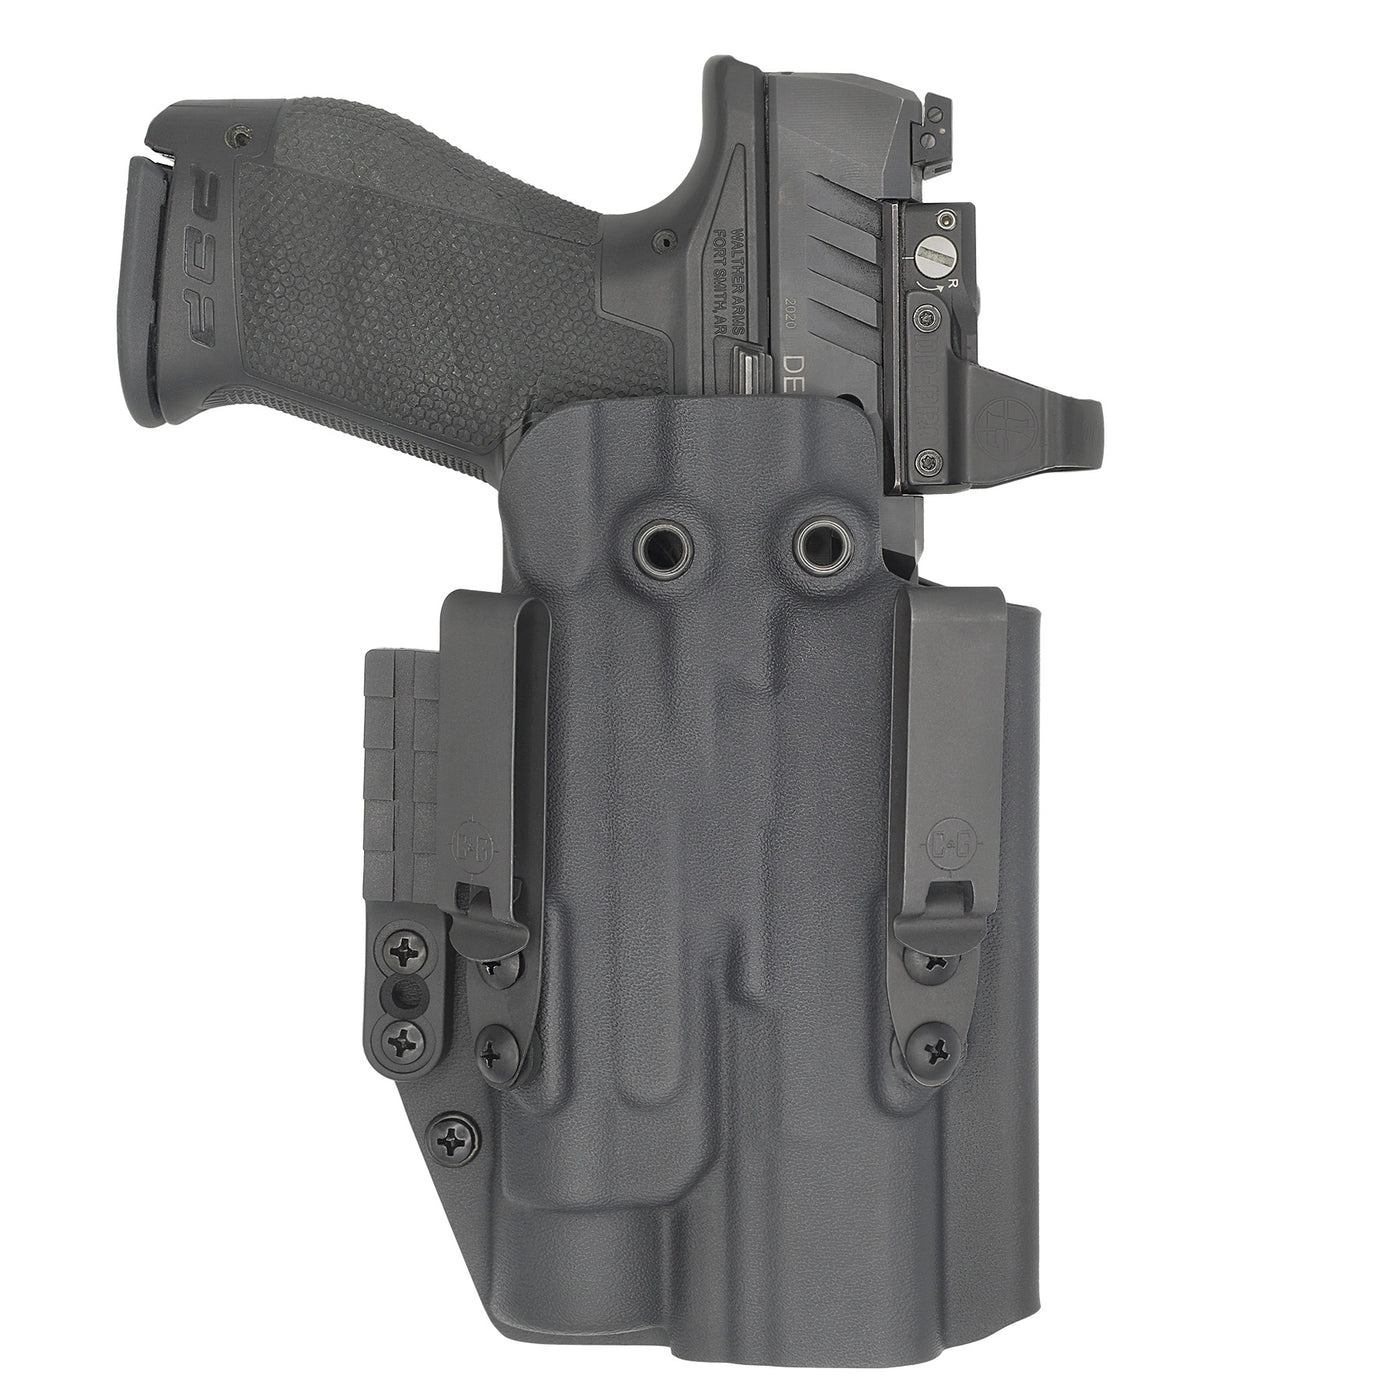 C&G Holsters custom IWB Tactical ALPHA UPGRADE S&W M&P 10/45 Streamlight TLR-1 in holstered position